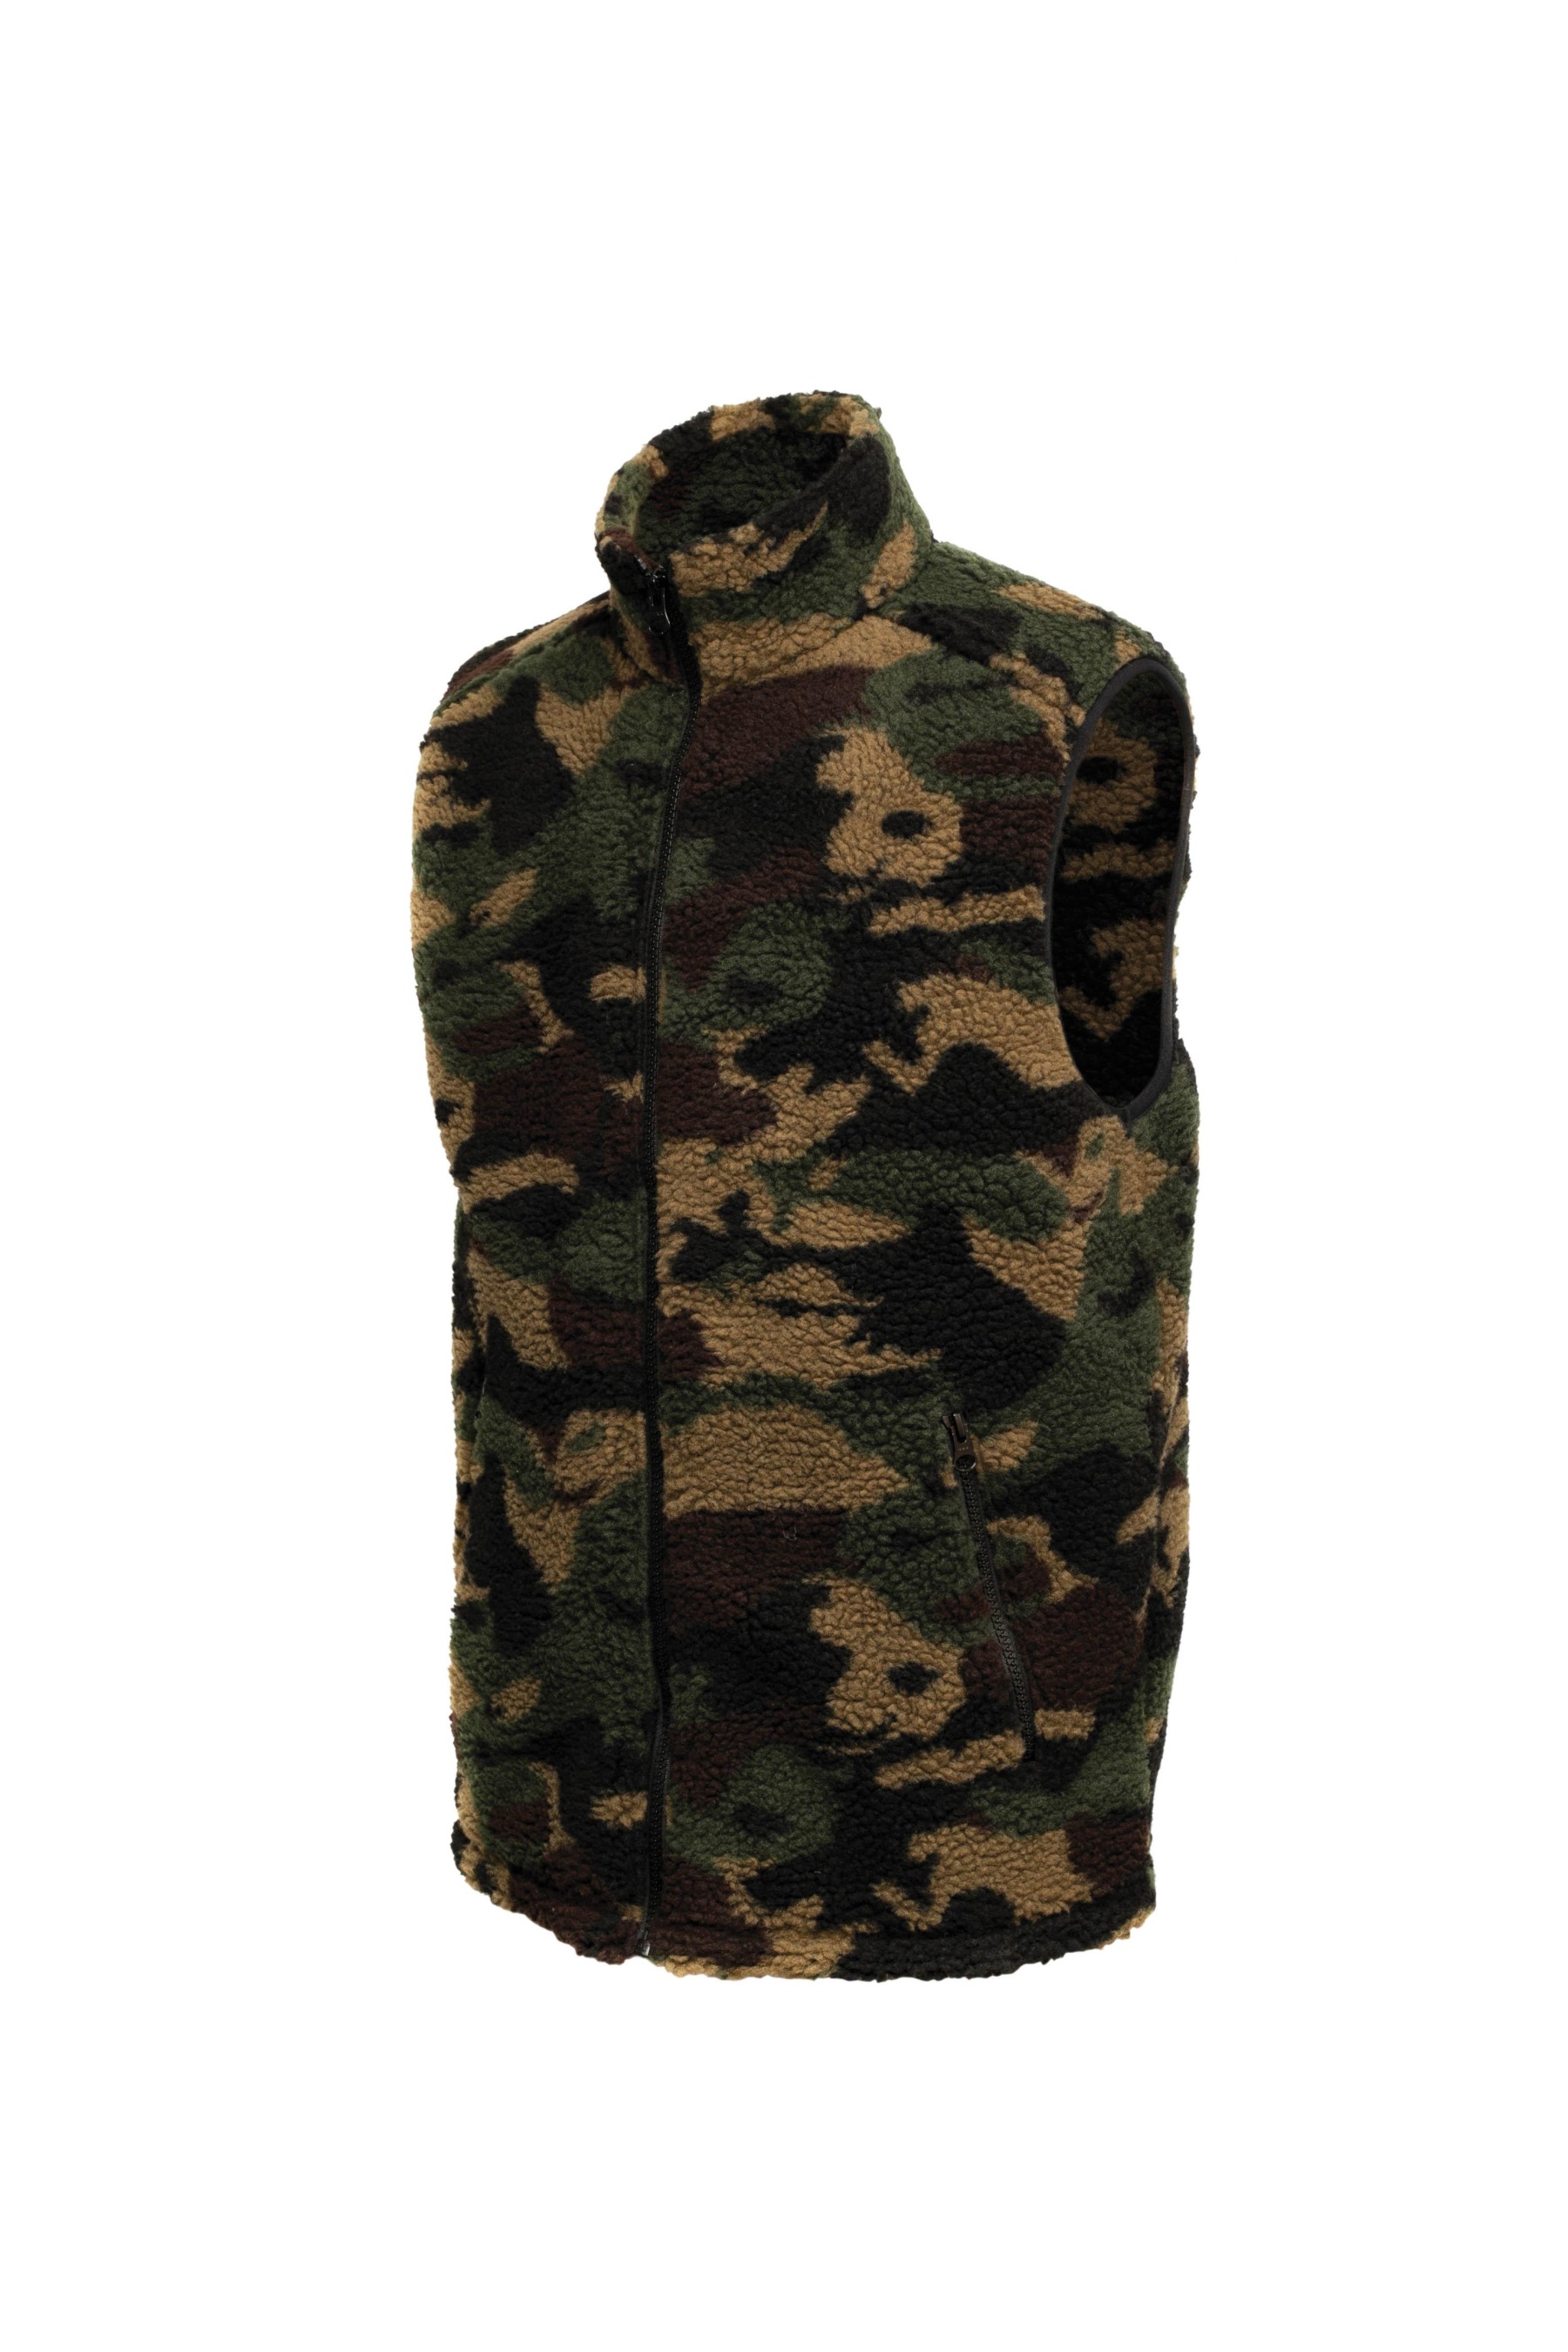 Fortis Camo Sherpa Fleece Hoody New All Sizes Carp Fortis Winter Clothing 